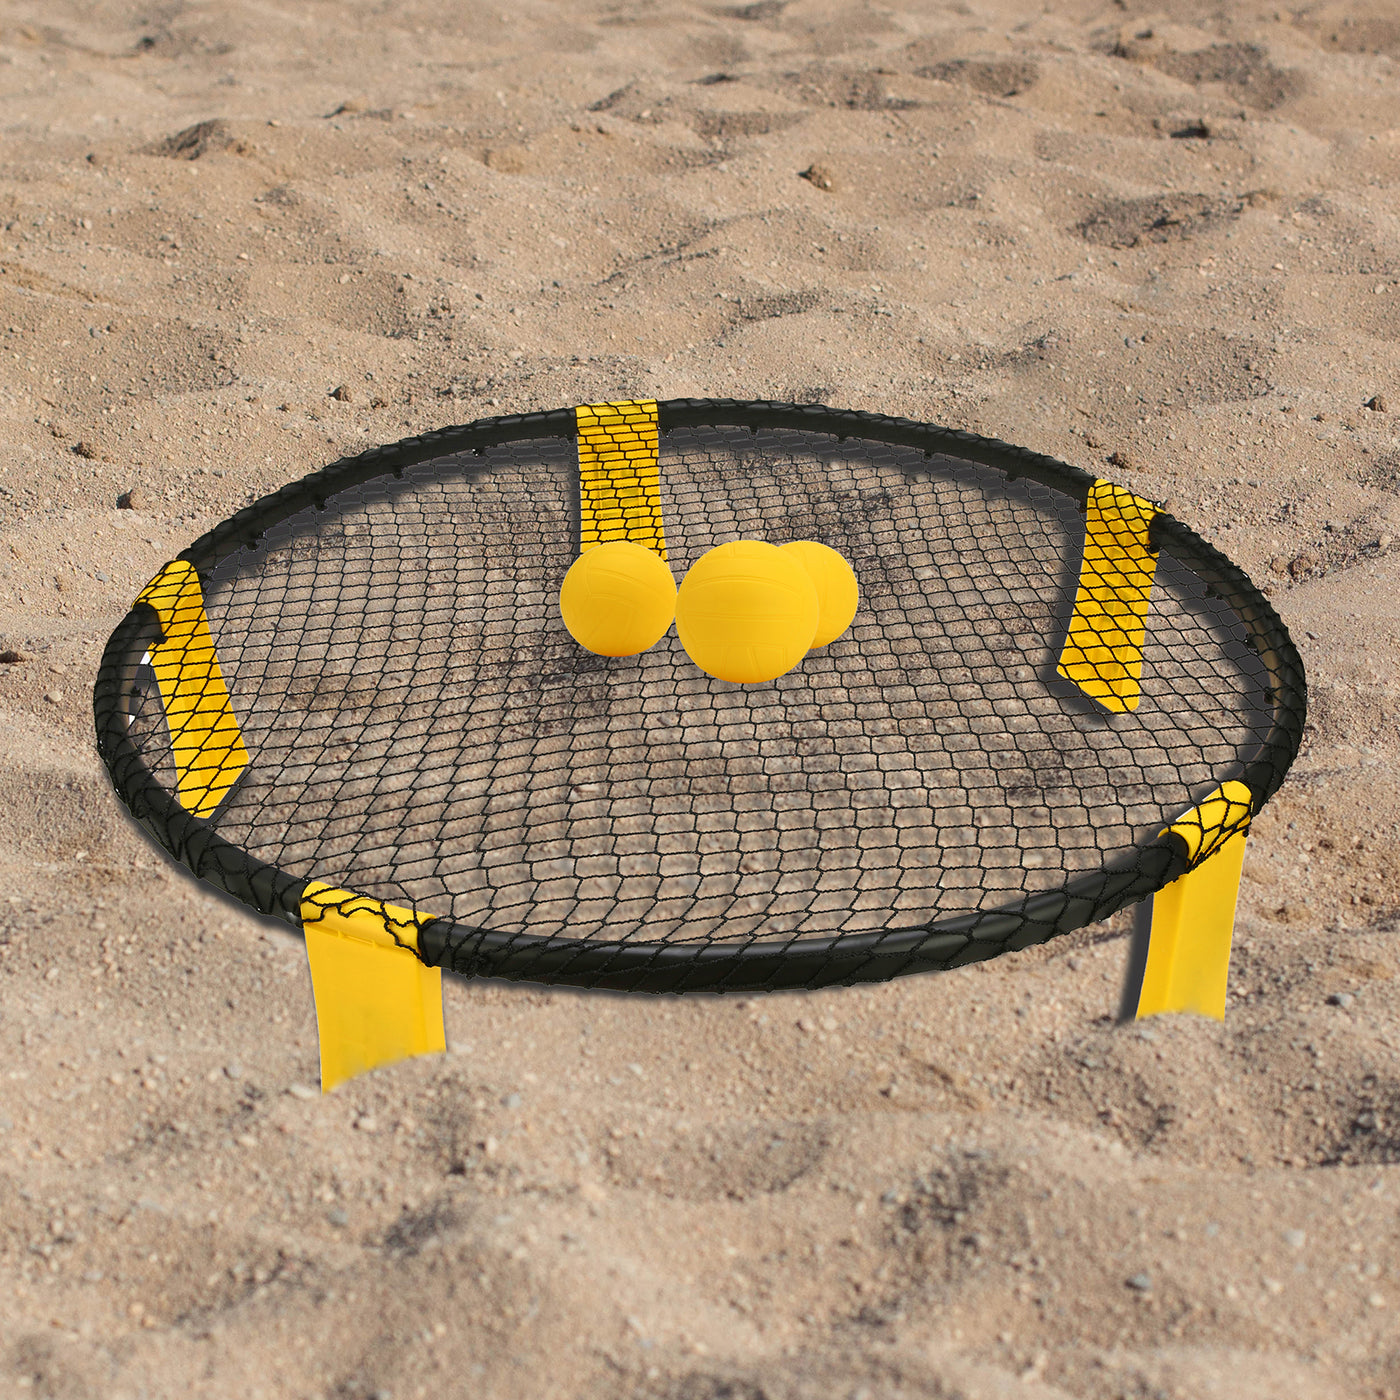 Volleyball Battle Ball Game Set Portable Indoor Outdoor Beach Yard Game